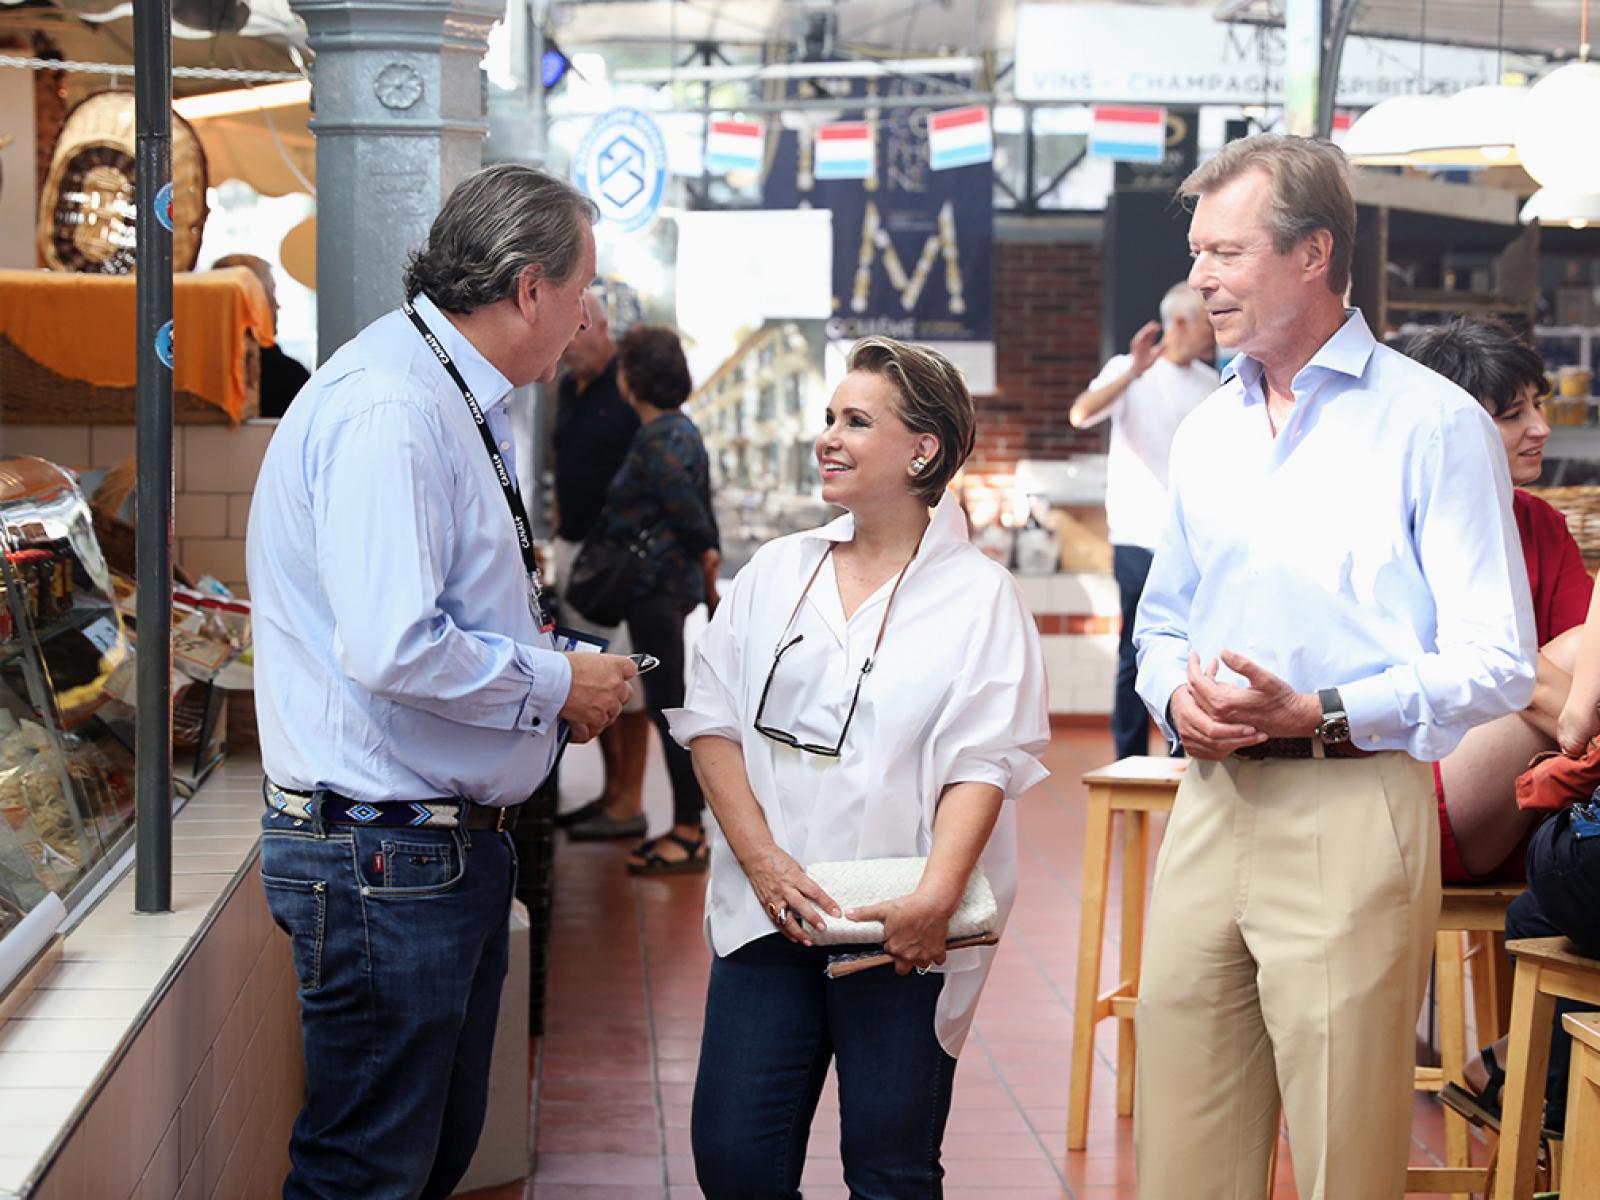 The Grand Ducal Couple talking to a man at the market